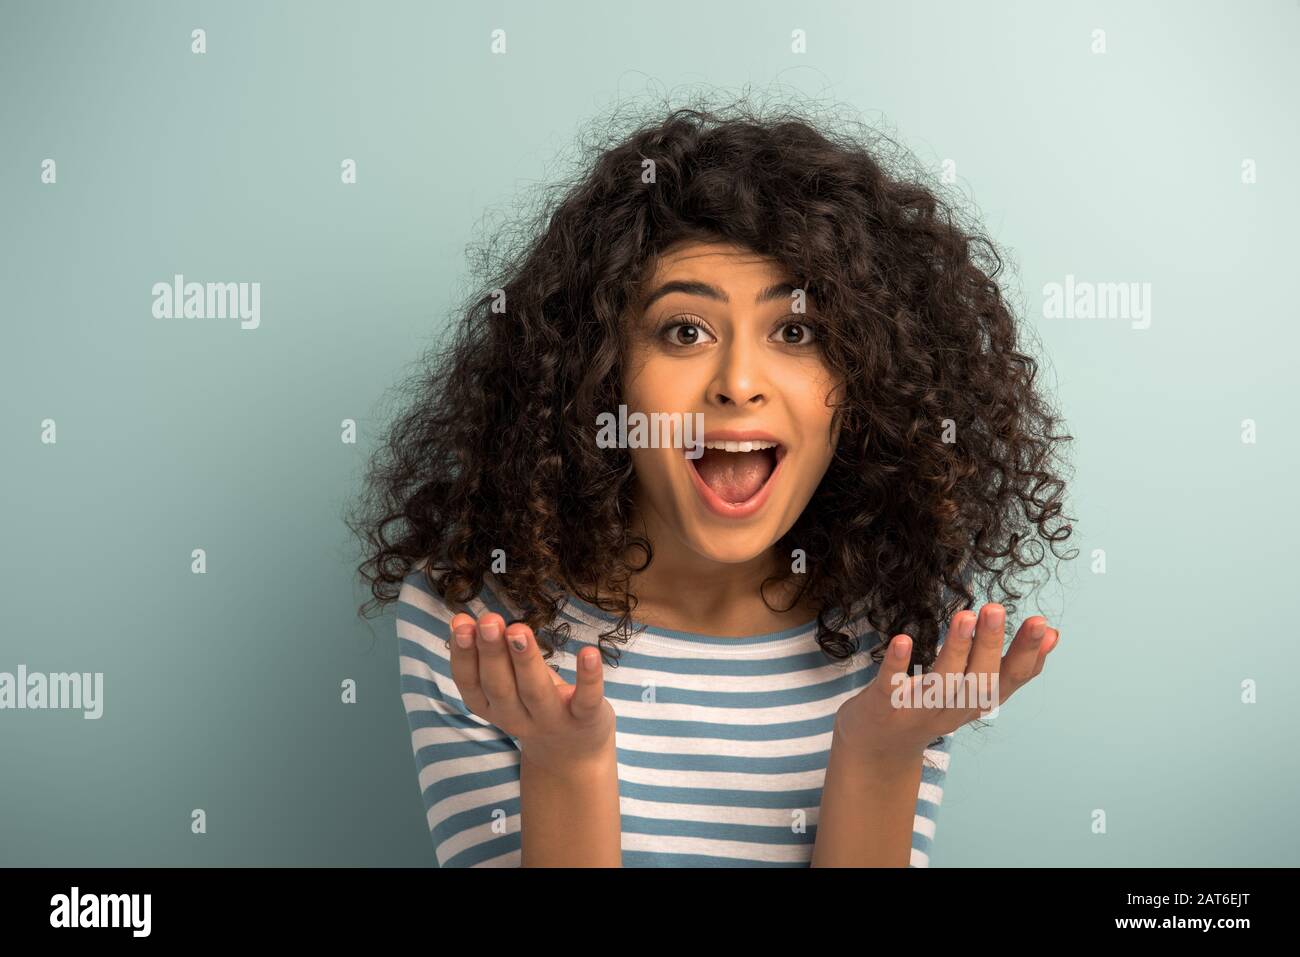 irritated mixed race girl shouting at camera and showing indignation gesture on grey background Stock Photo